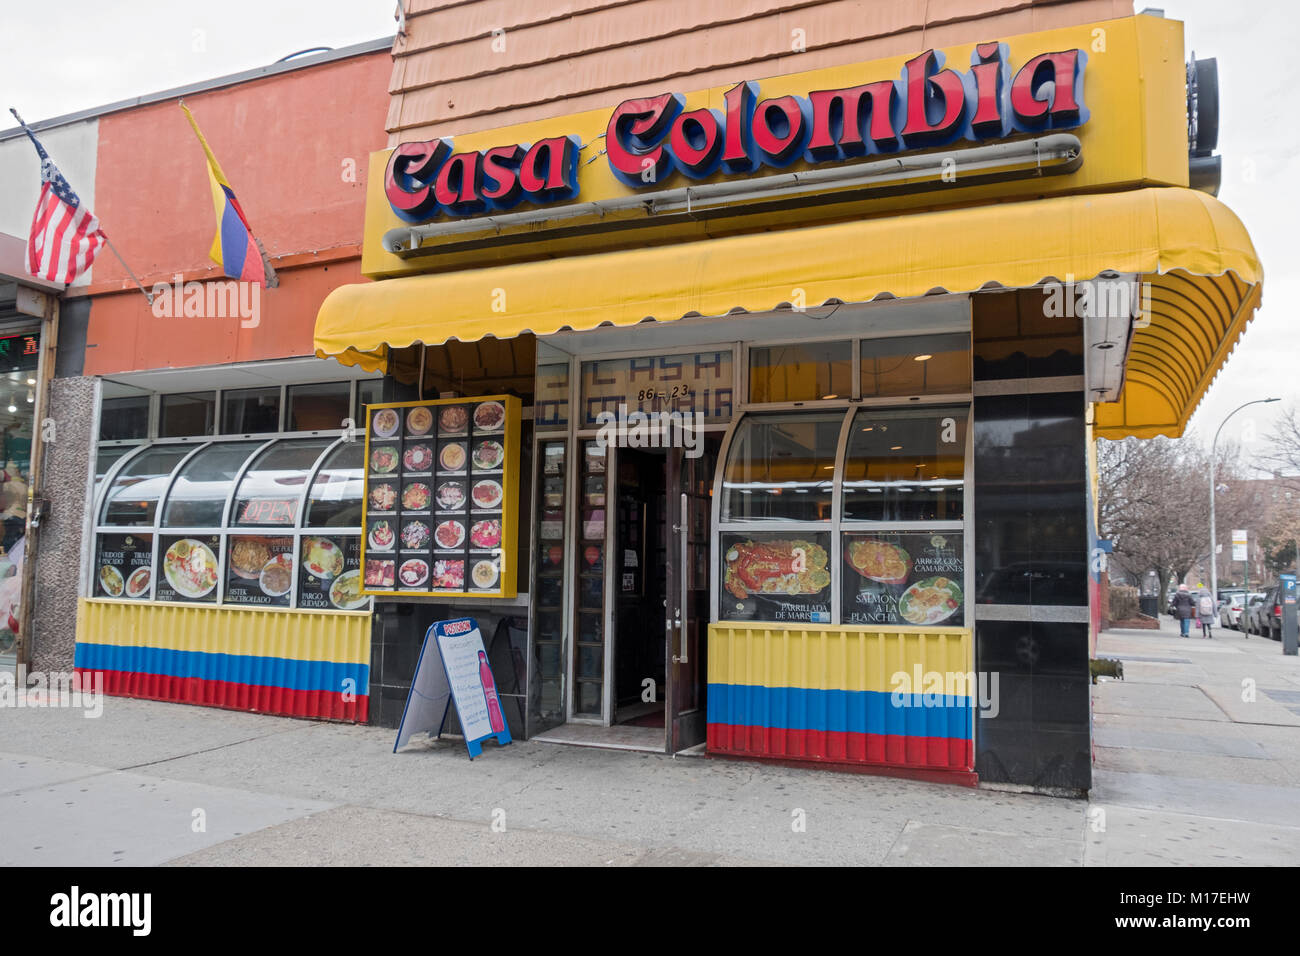 The exterior of Casa Columbia, a Columbian restaurant on Roosevelt Avenue in Jackson Heights, Queens, New York Stock Photo